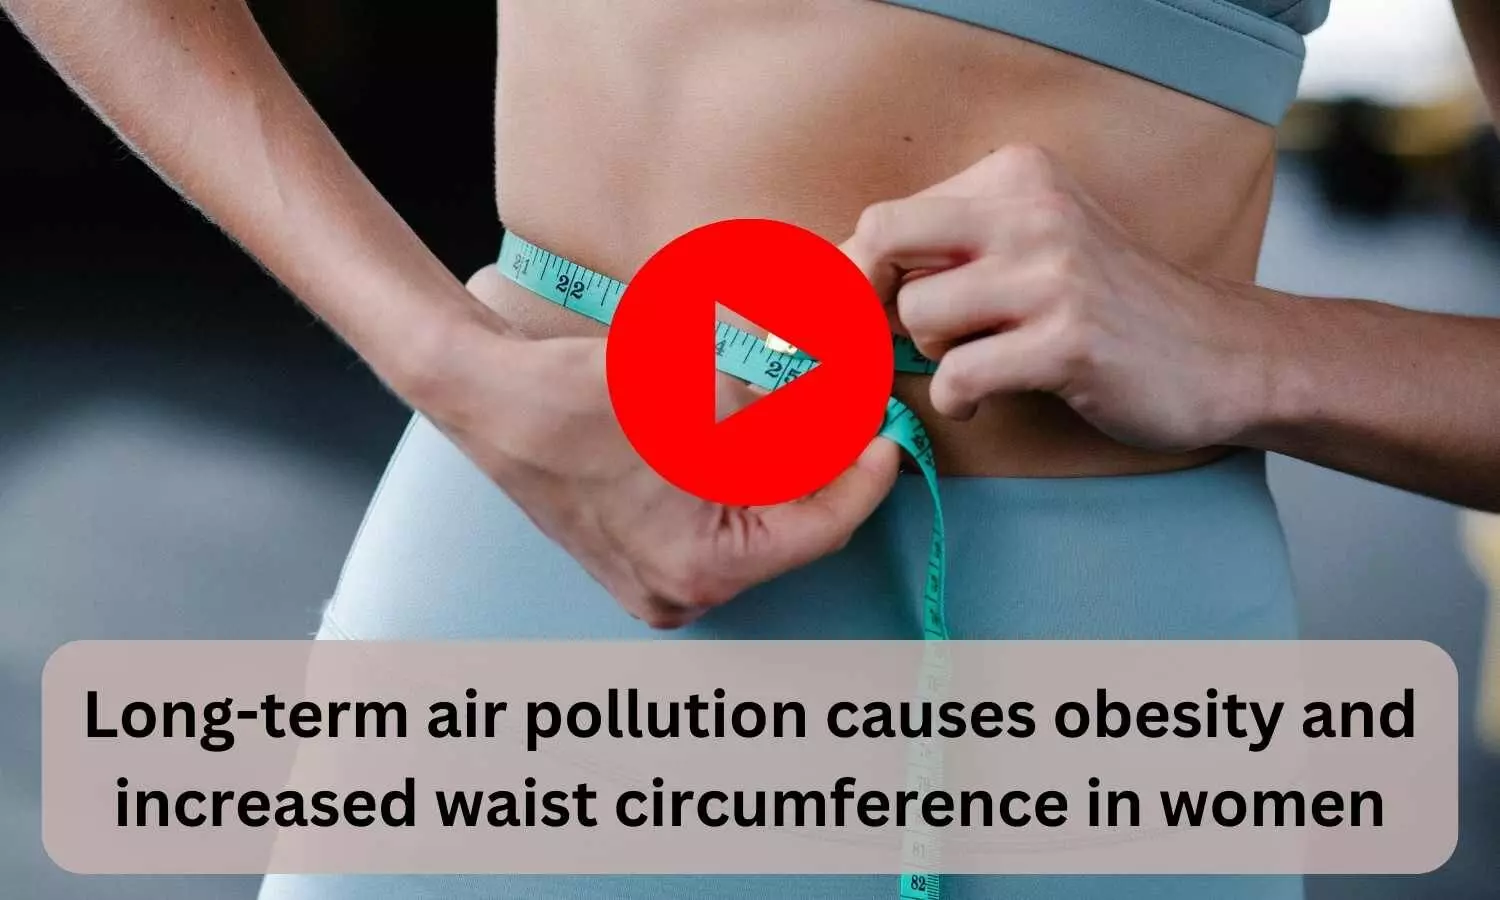 Long-term air pollution causes obesity and increased waist circumference in women